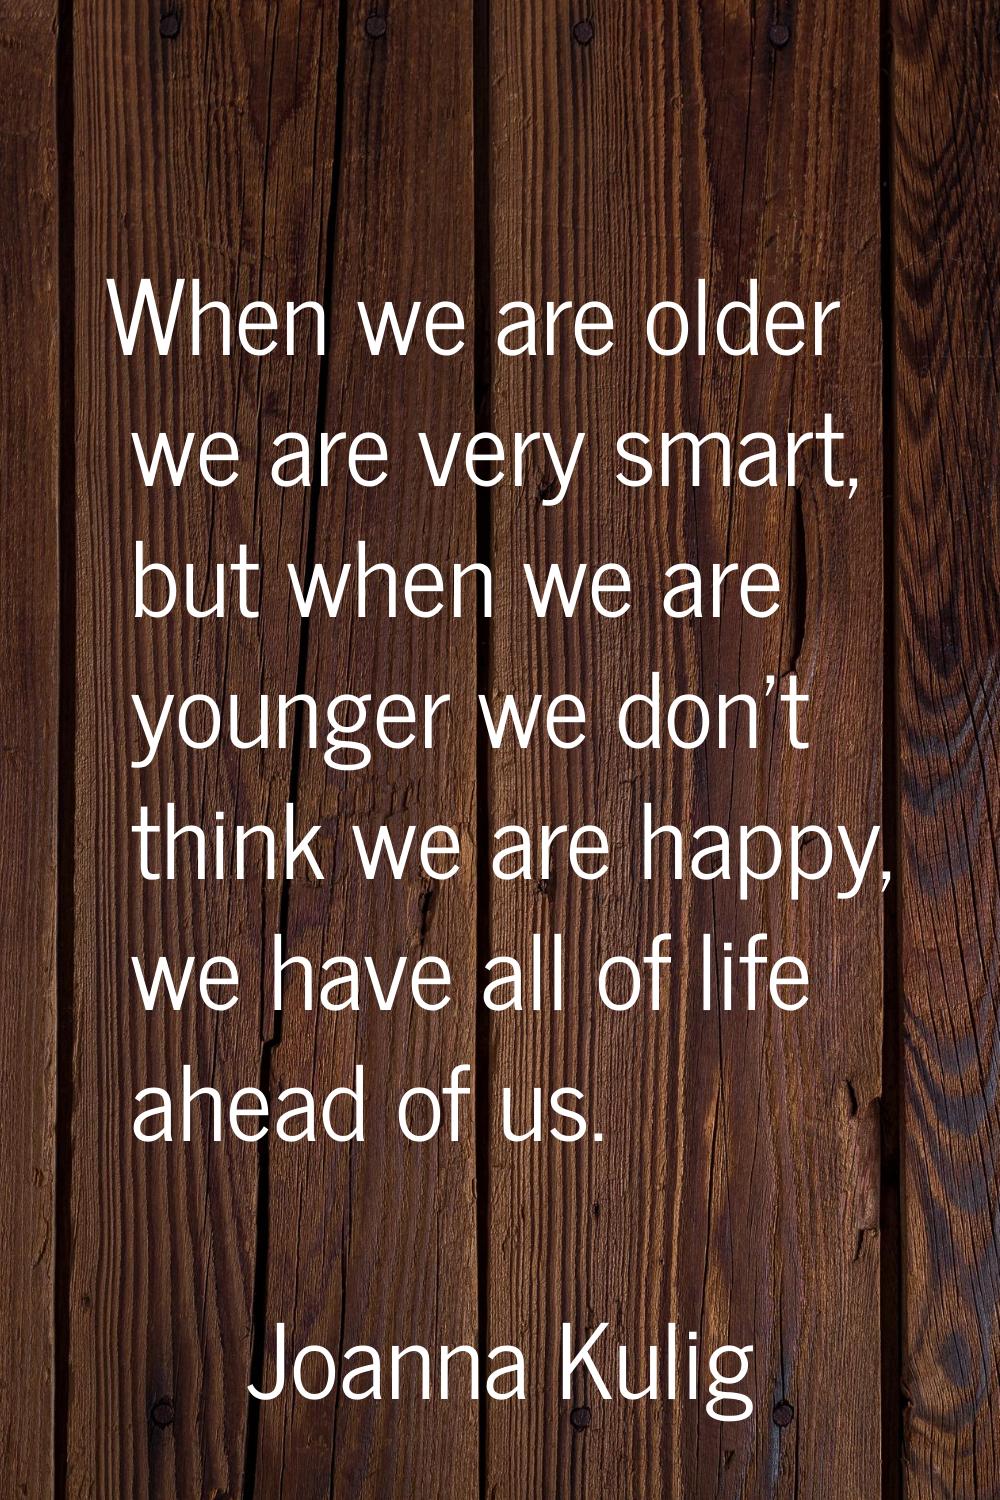 When we are older we are very smart, but when we are younger we don't think we are happy, we have a